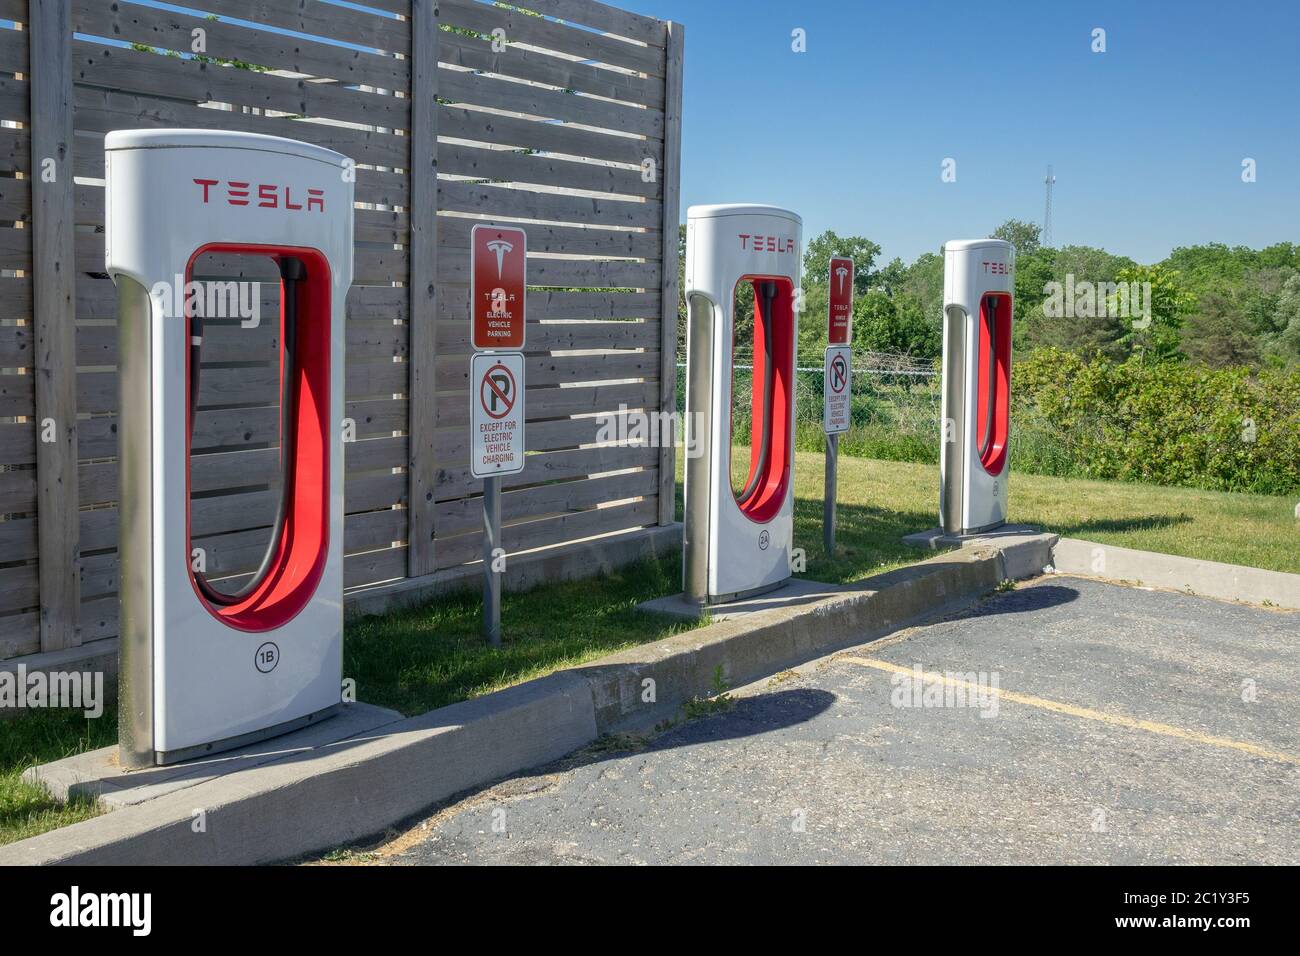 Tesla Electric Vehicle Charging Station Supercharging Network In Woodstock Ontario Canada Stock Photo